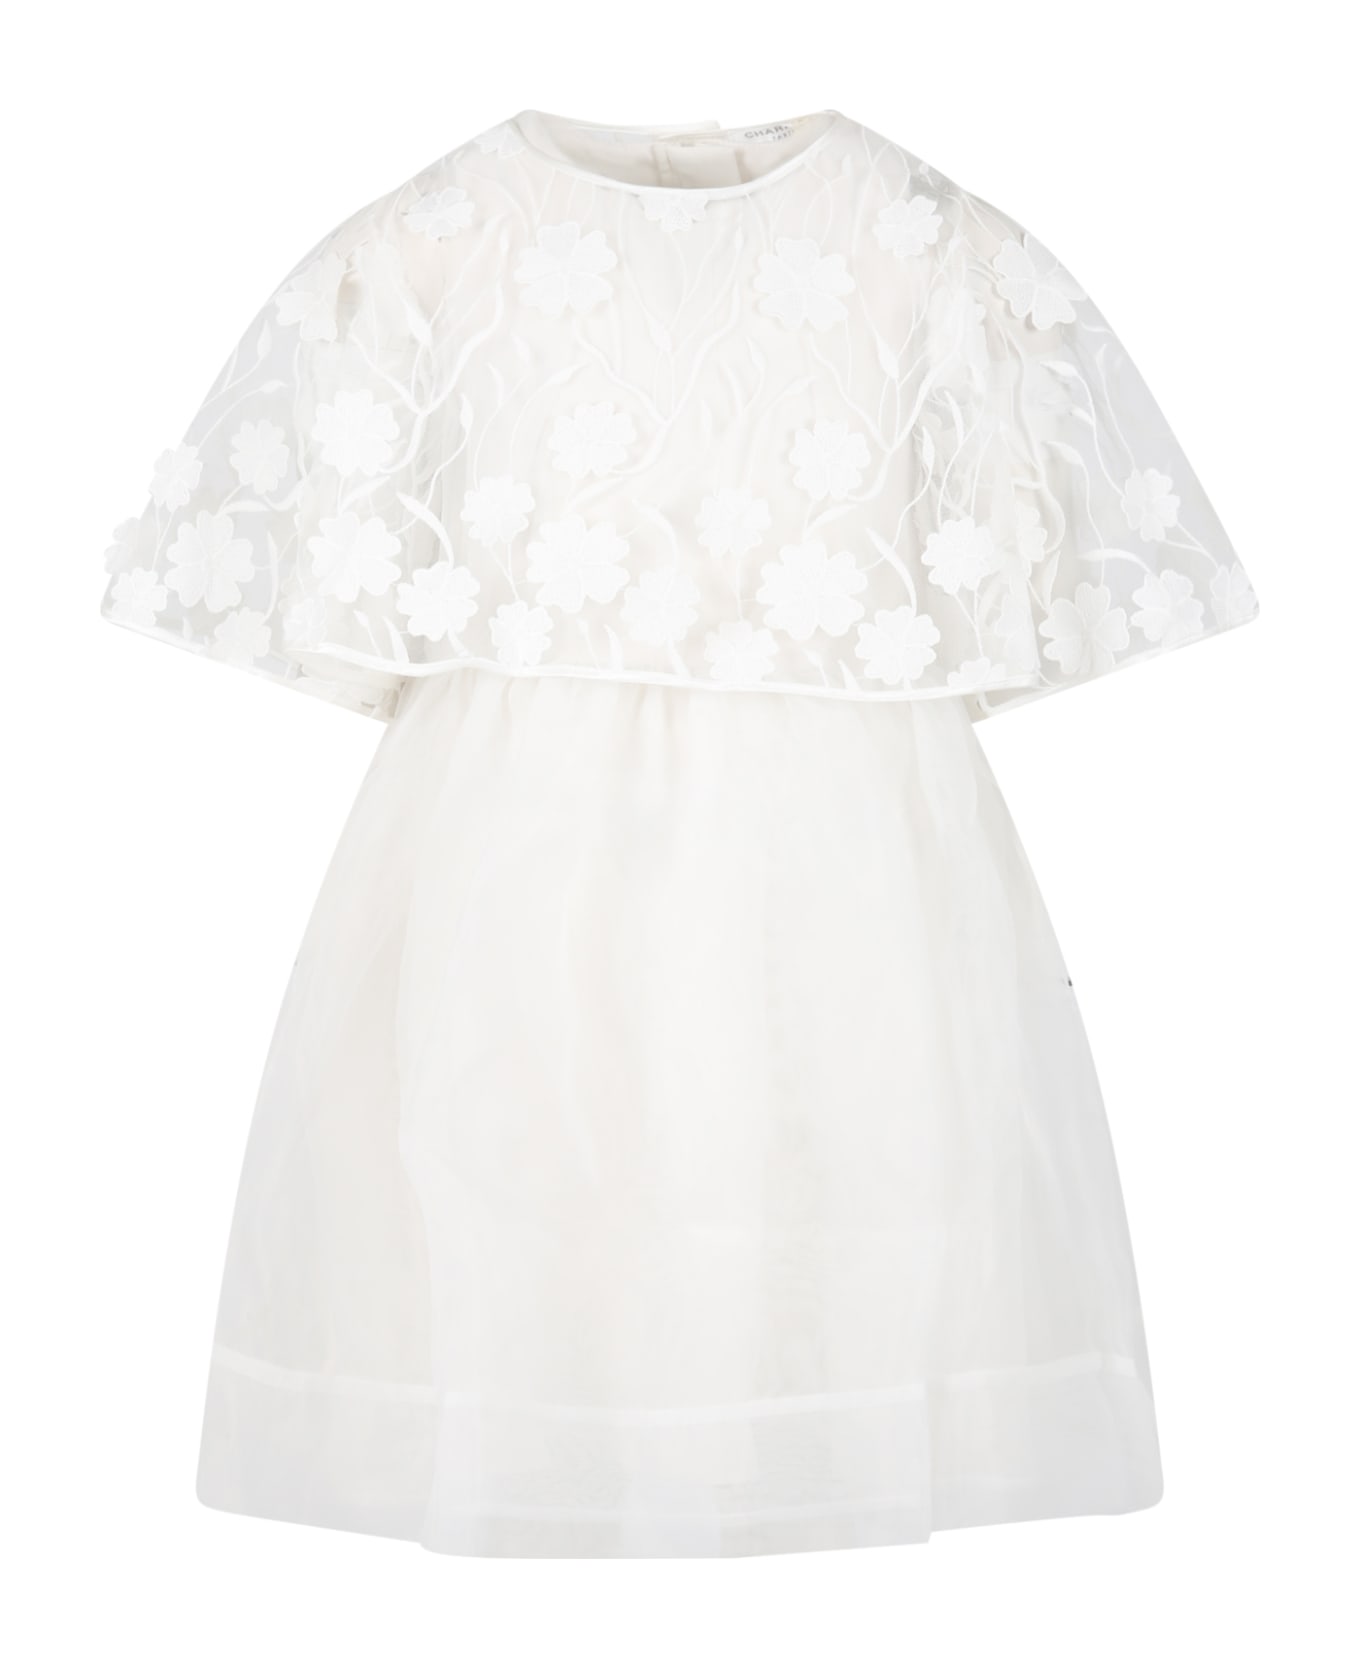 Charabia White Dress For Girl With Lace - Ivory